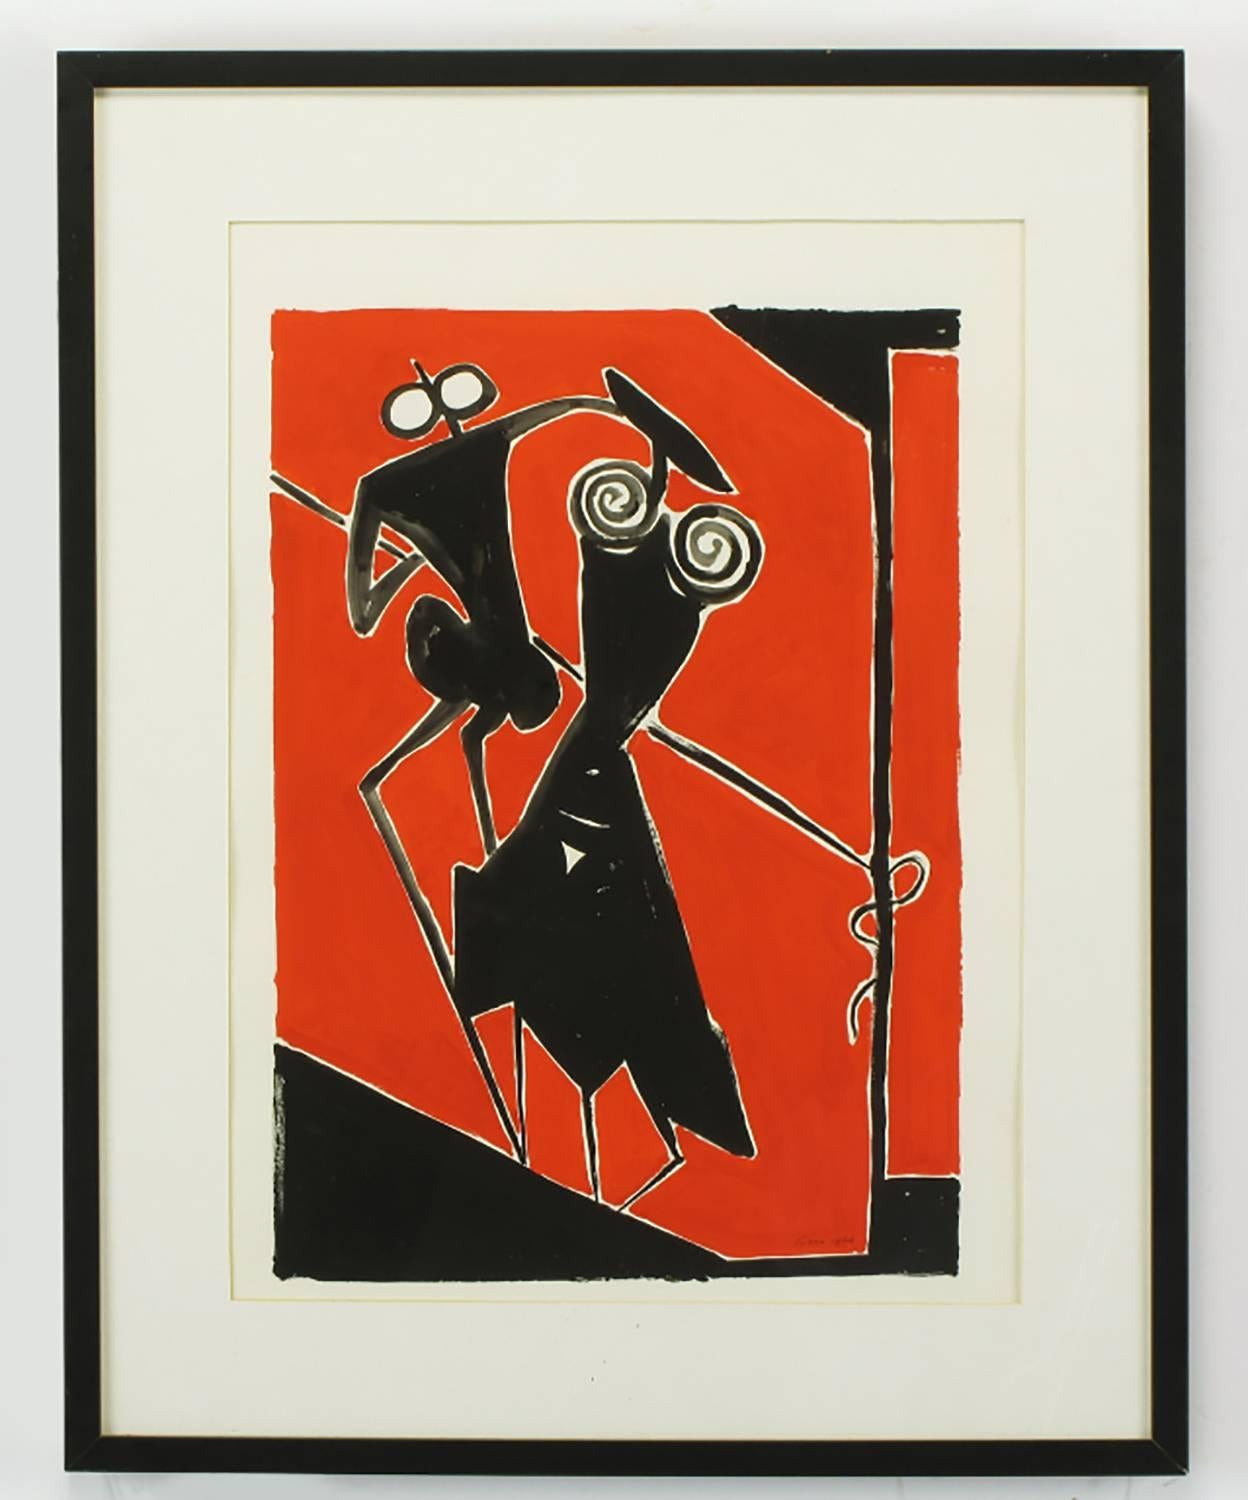 Abstract black and red gouache on card by artist, furniture and lighting designer, Ugo Sissa (1913-1980). Matted in a black lacquered wood frame, signed and dated lower right. Measures: Framed 30